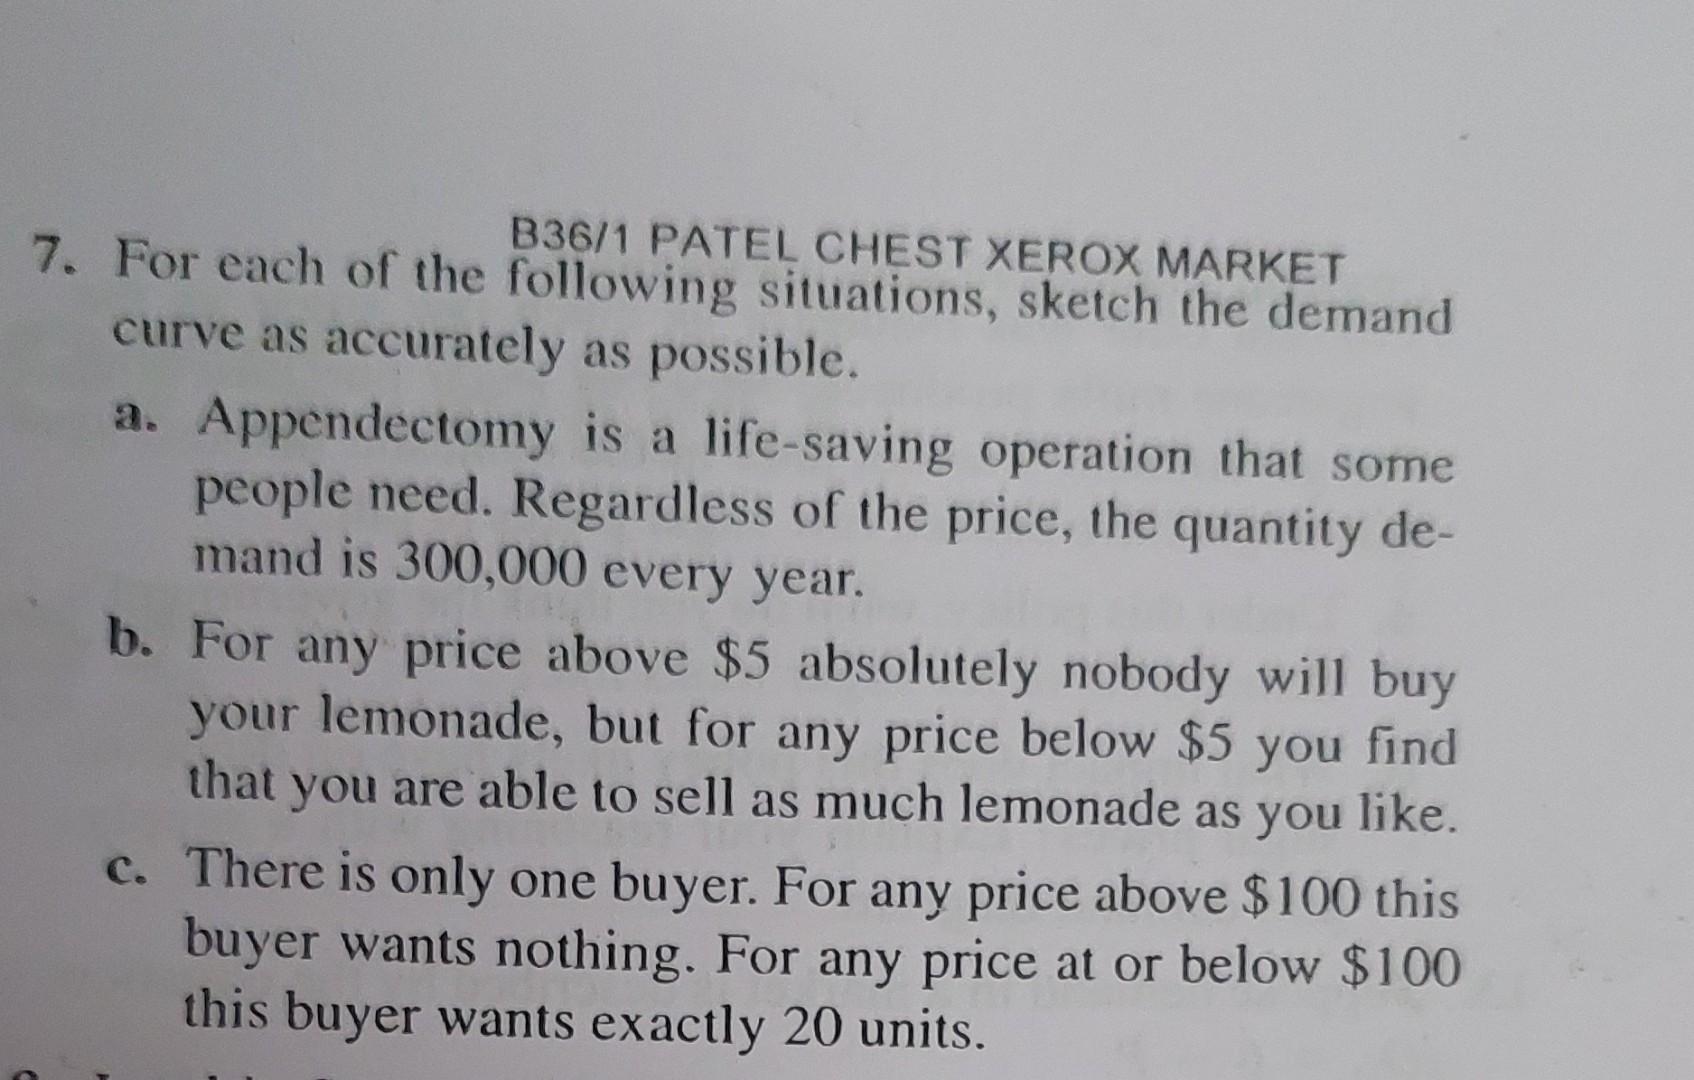 Solved 7. For each of the B36/1 PATEL CHEST XEROX MARKET